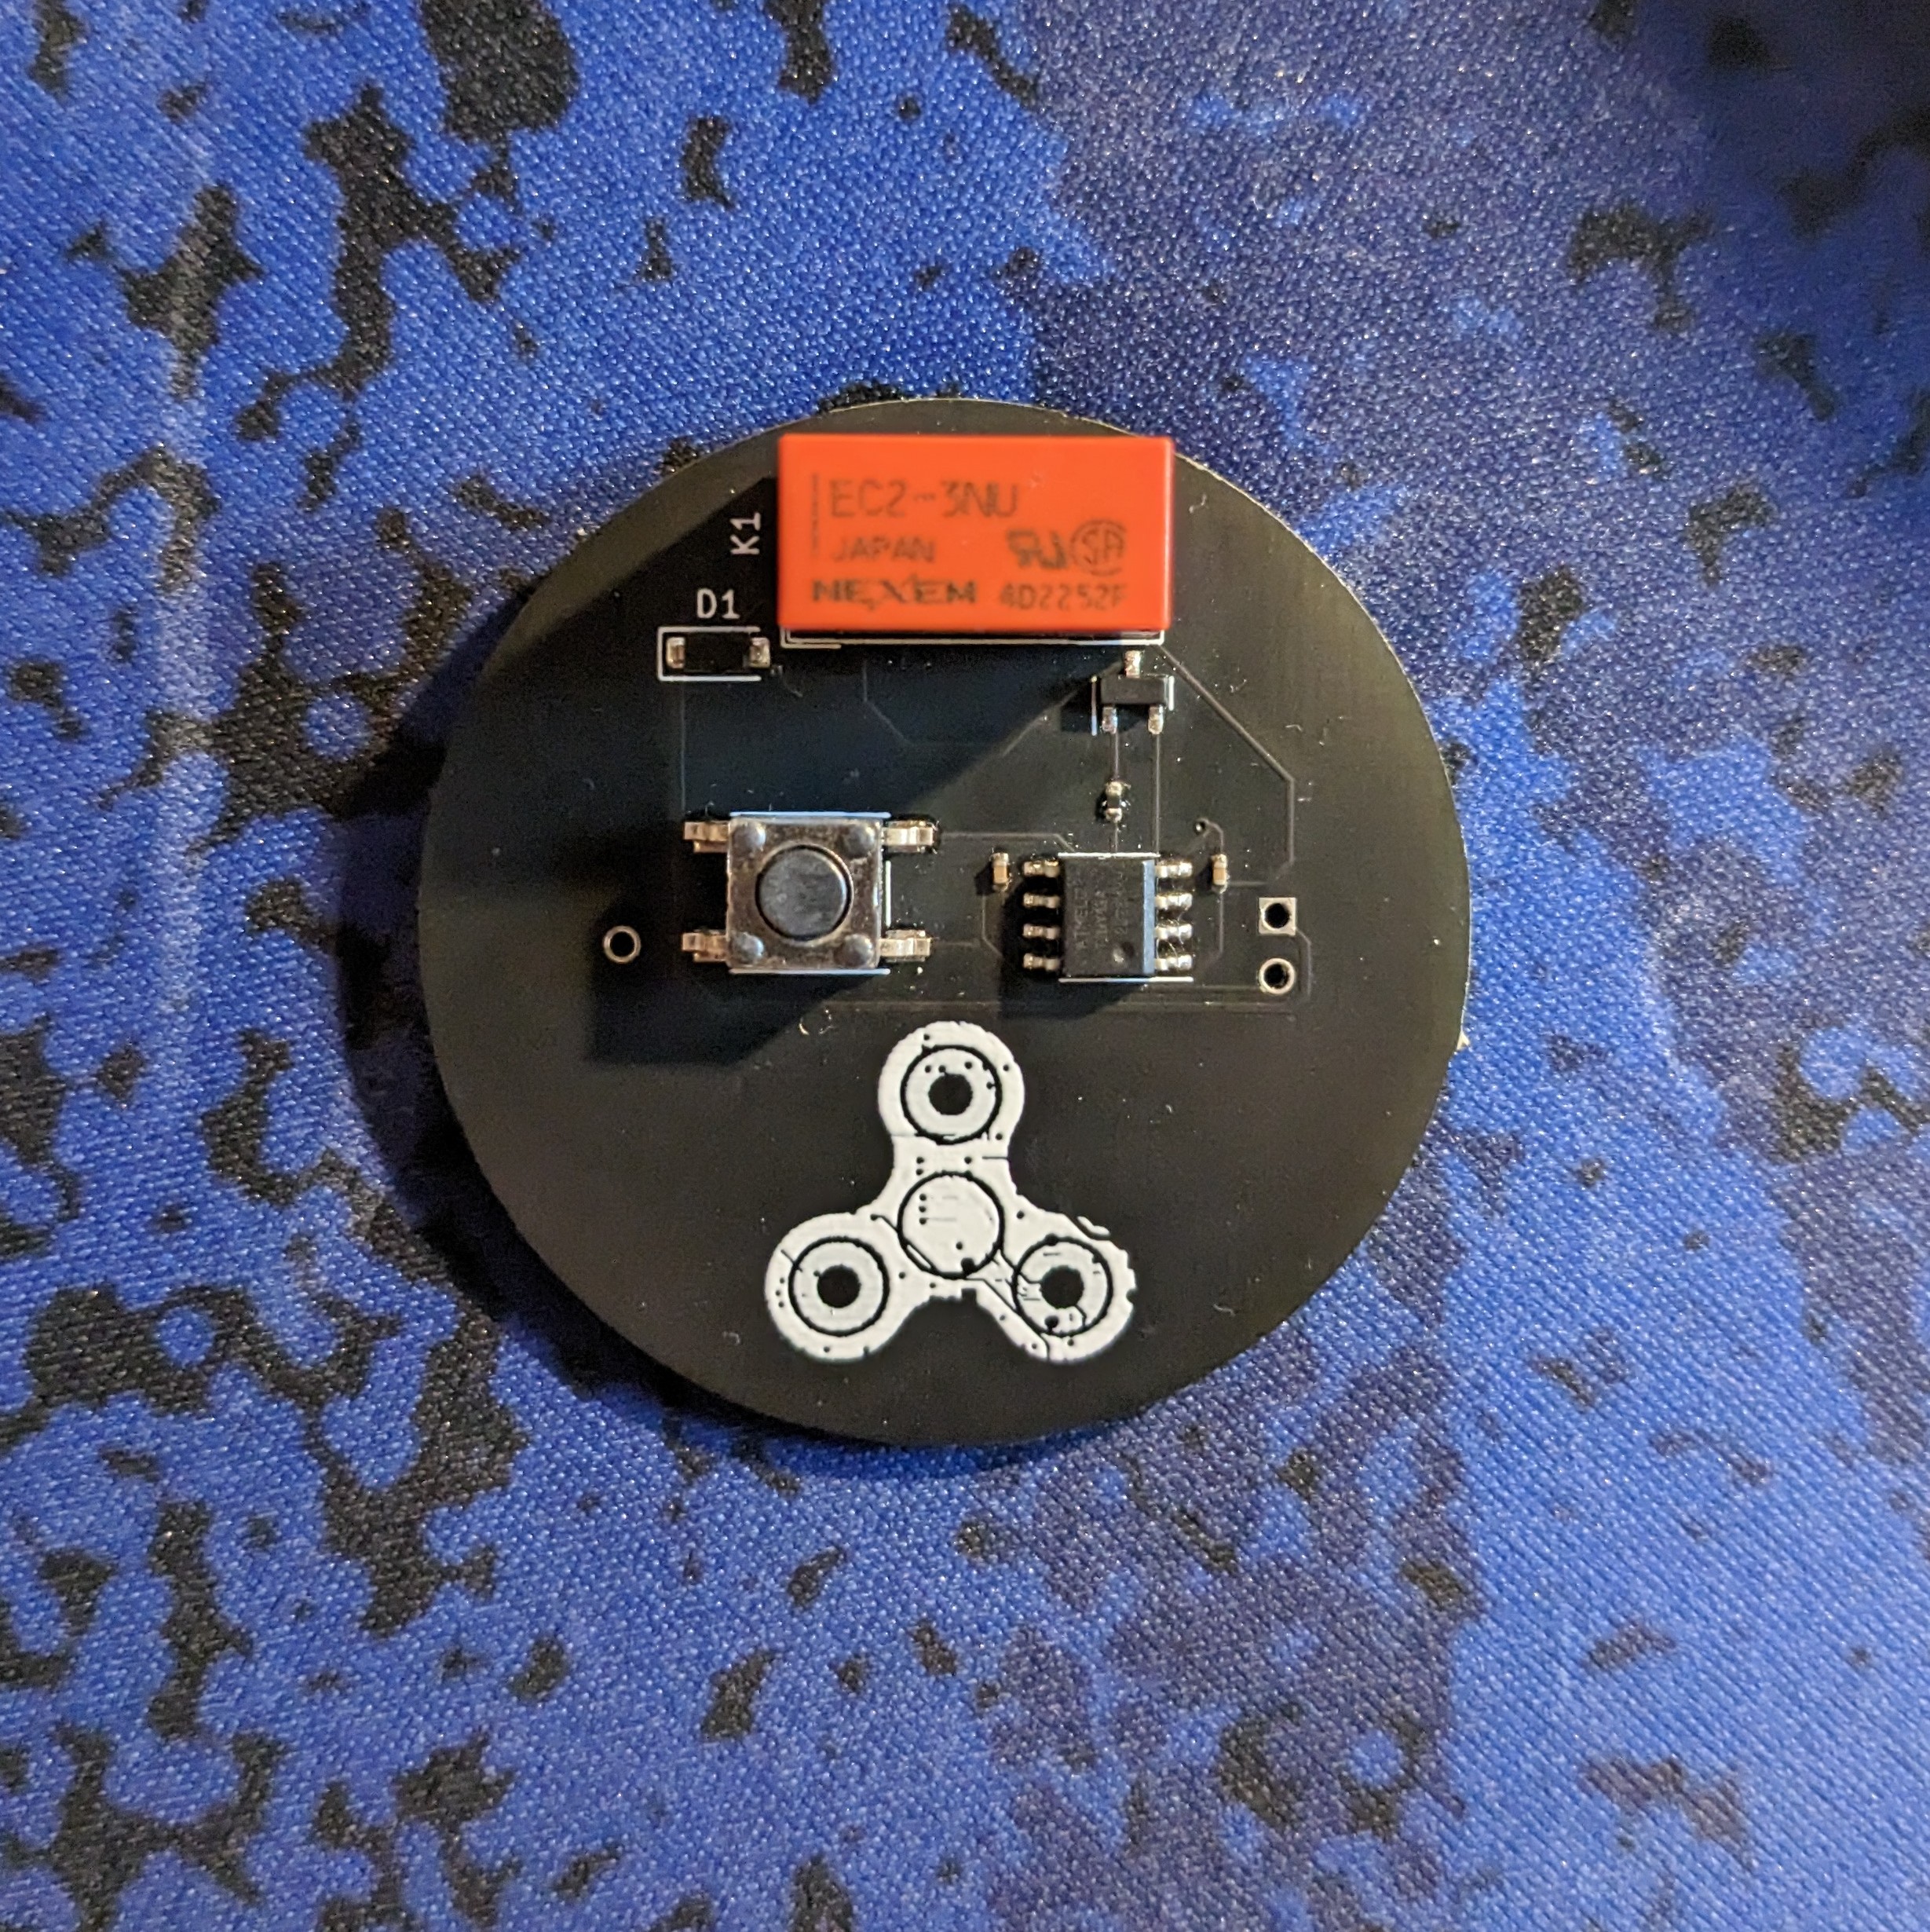 Version one of the E-Fidget Lite printed circuit board. Black board with an orange rectangular relay at the top and the E-Fidget logo in white silkscreen at the bottom.